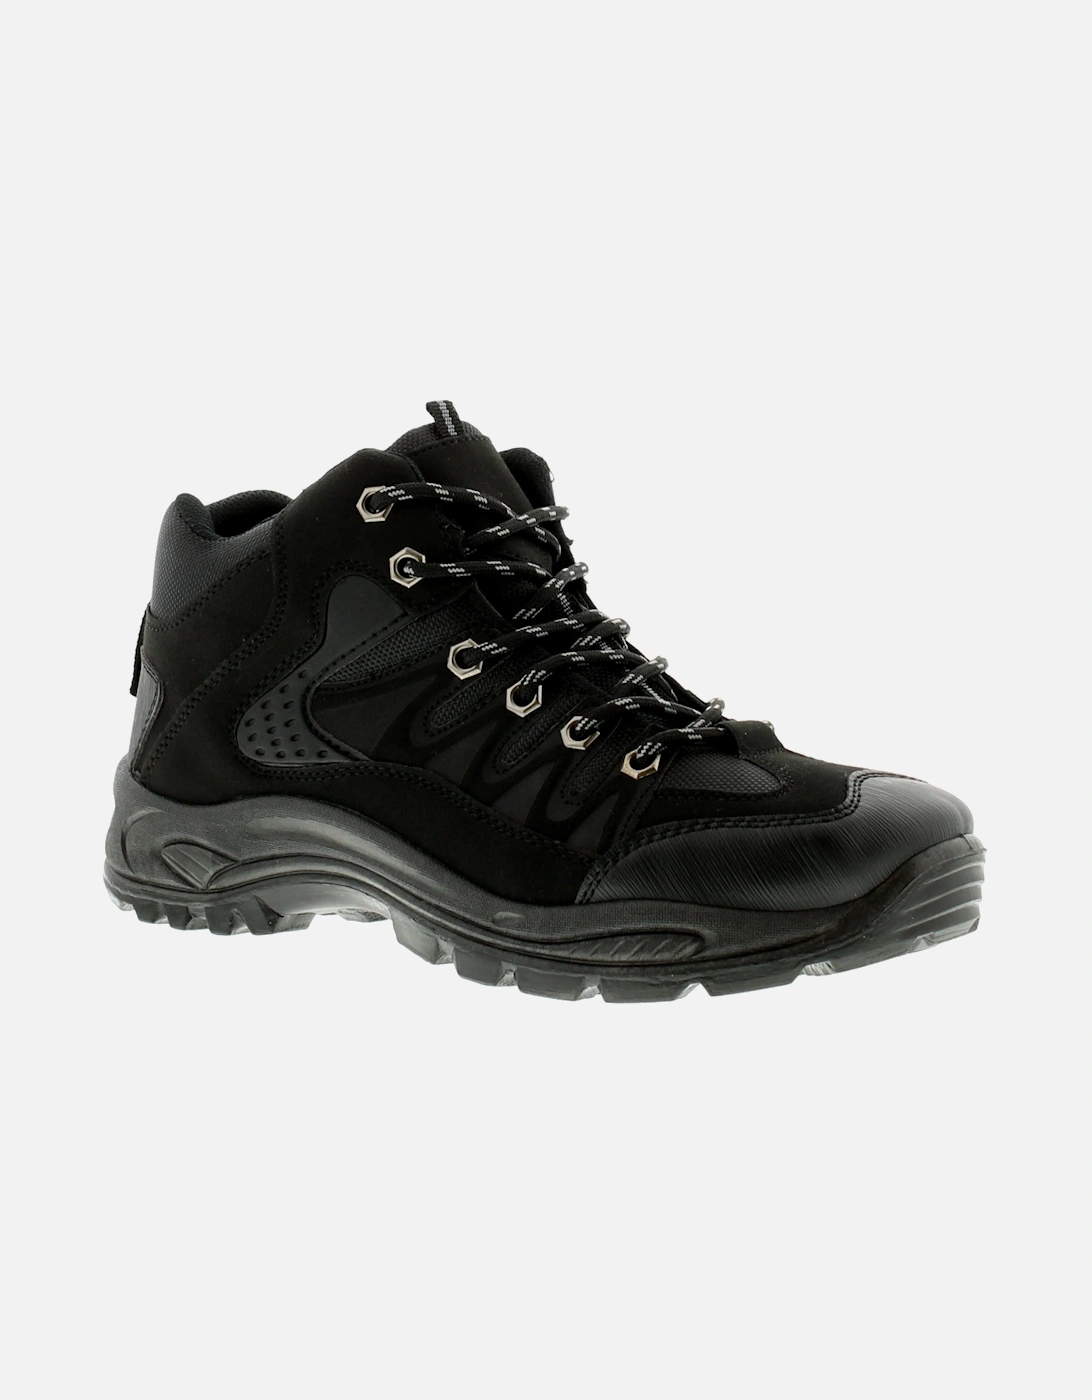 Mens Walking Boots Climber Lace Up black UK Size, 6 of 5